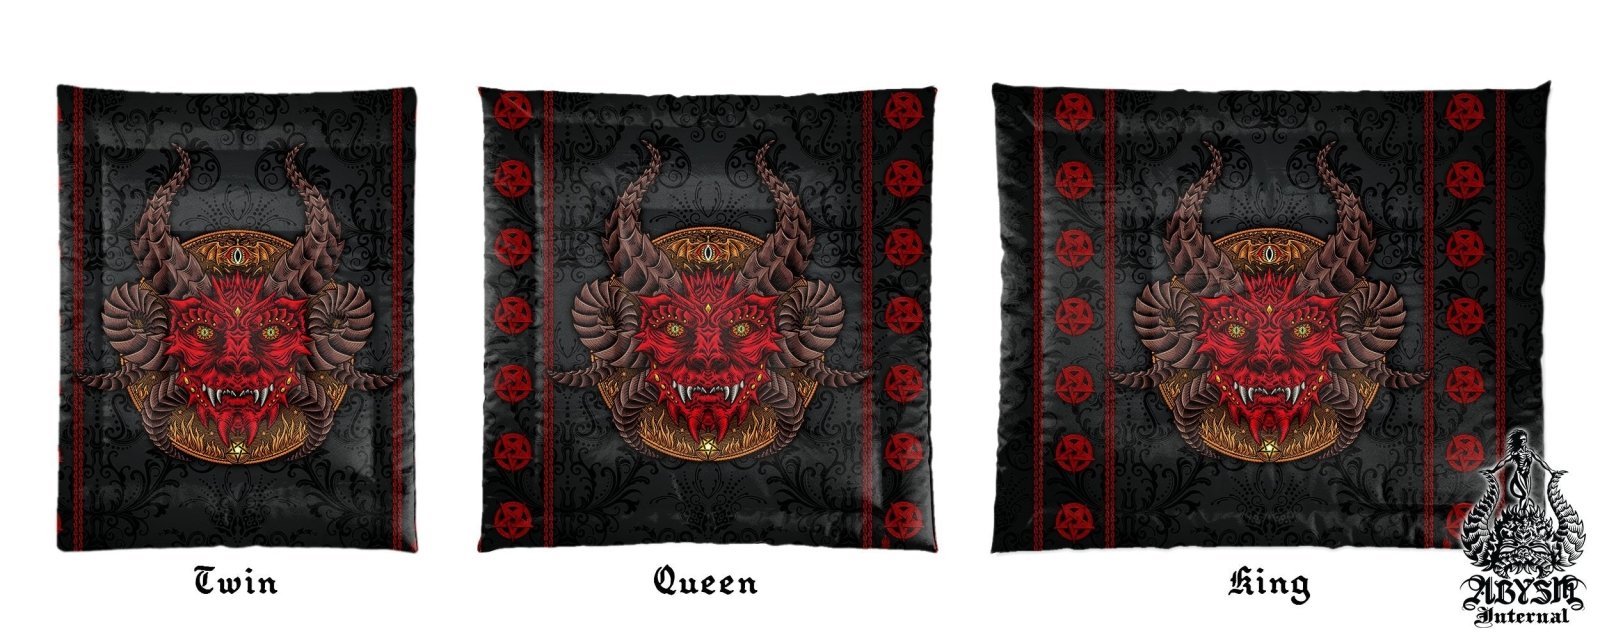 Demon Bedding Set, Comforter and Duvet, Satanic Bed Cover, Alternative Bedroom Decor, King, Queen and Twin Size - Devil - Abysm Internal